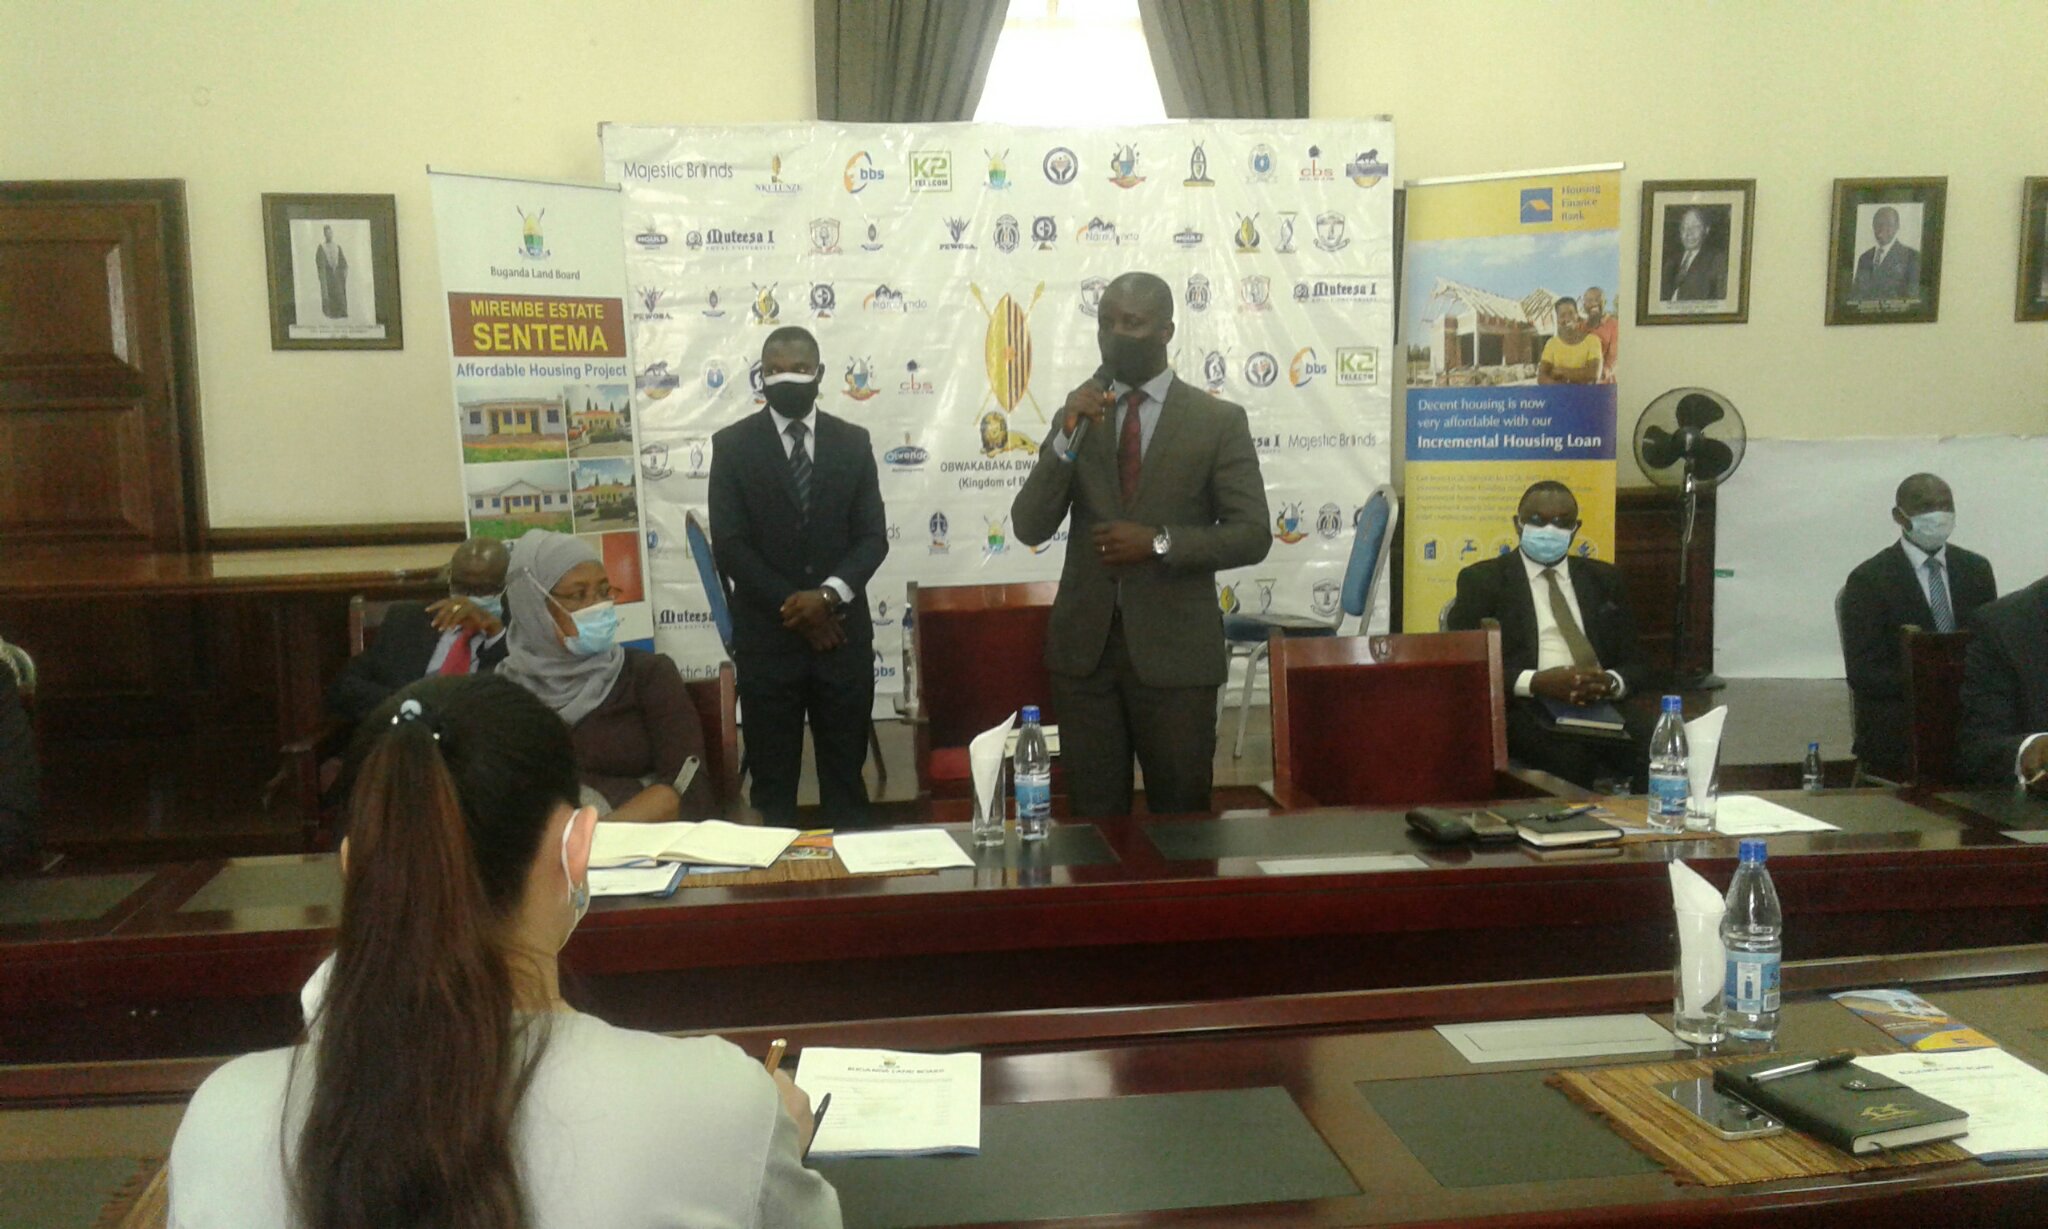 Buganda Land Board CEO, Simon Kabogoza, speaking at a ceremony about enabling those who wish to get houses in Sentema have access to mortgage services from Housing Finance Bank.